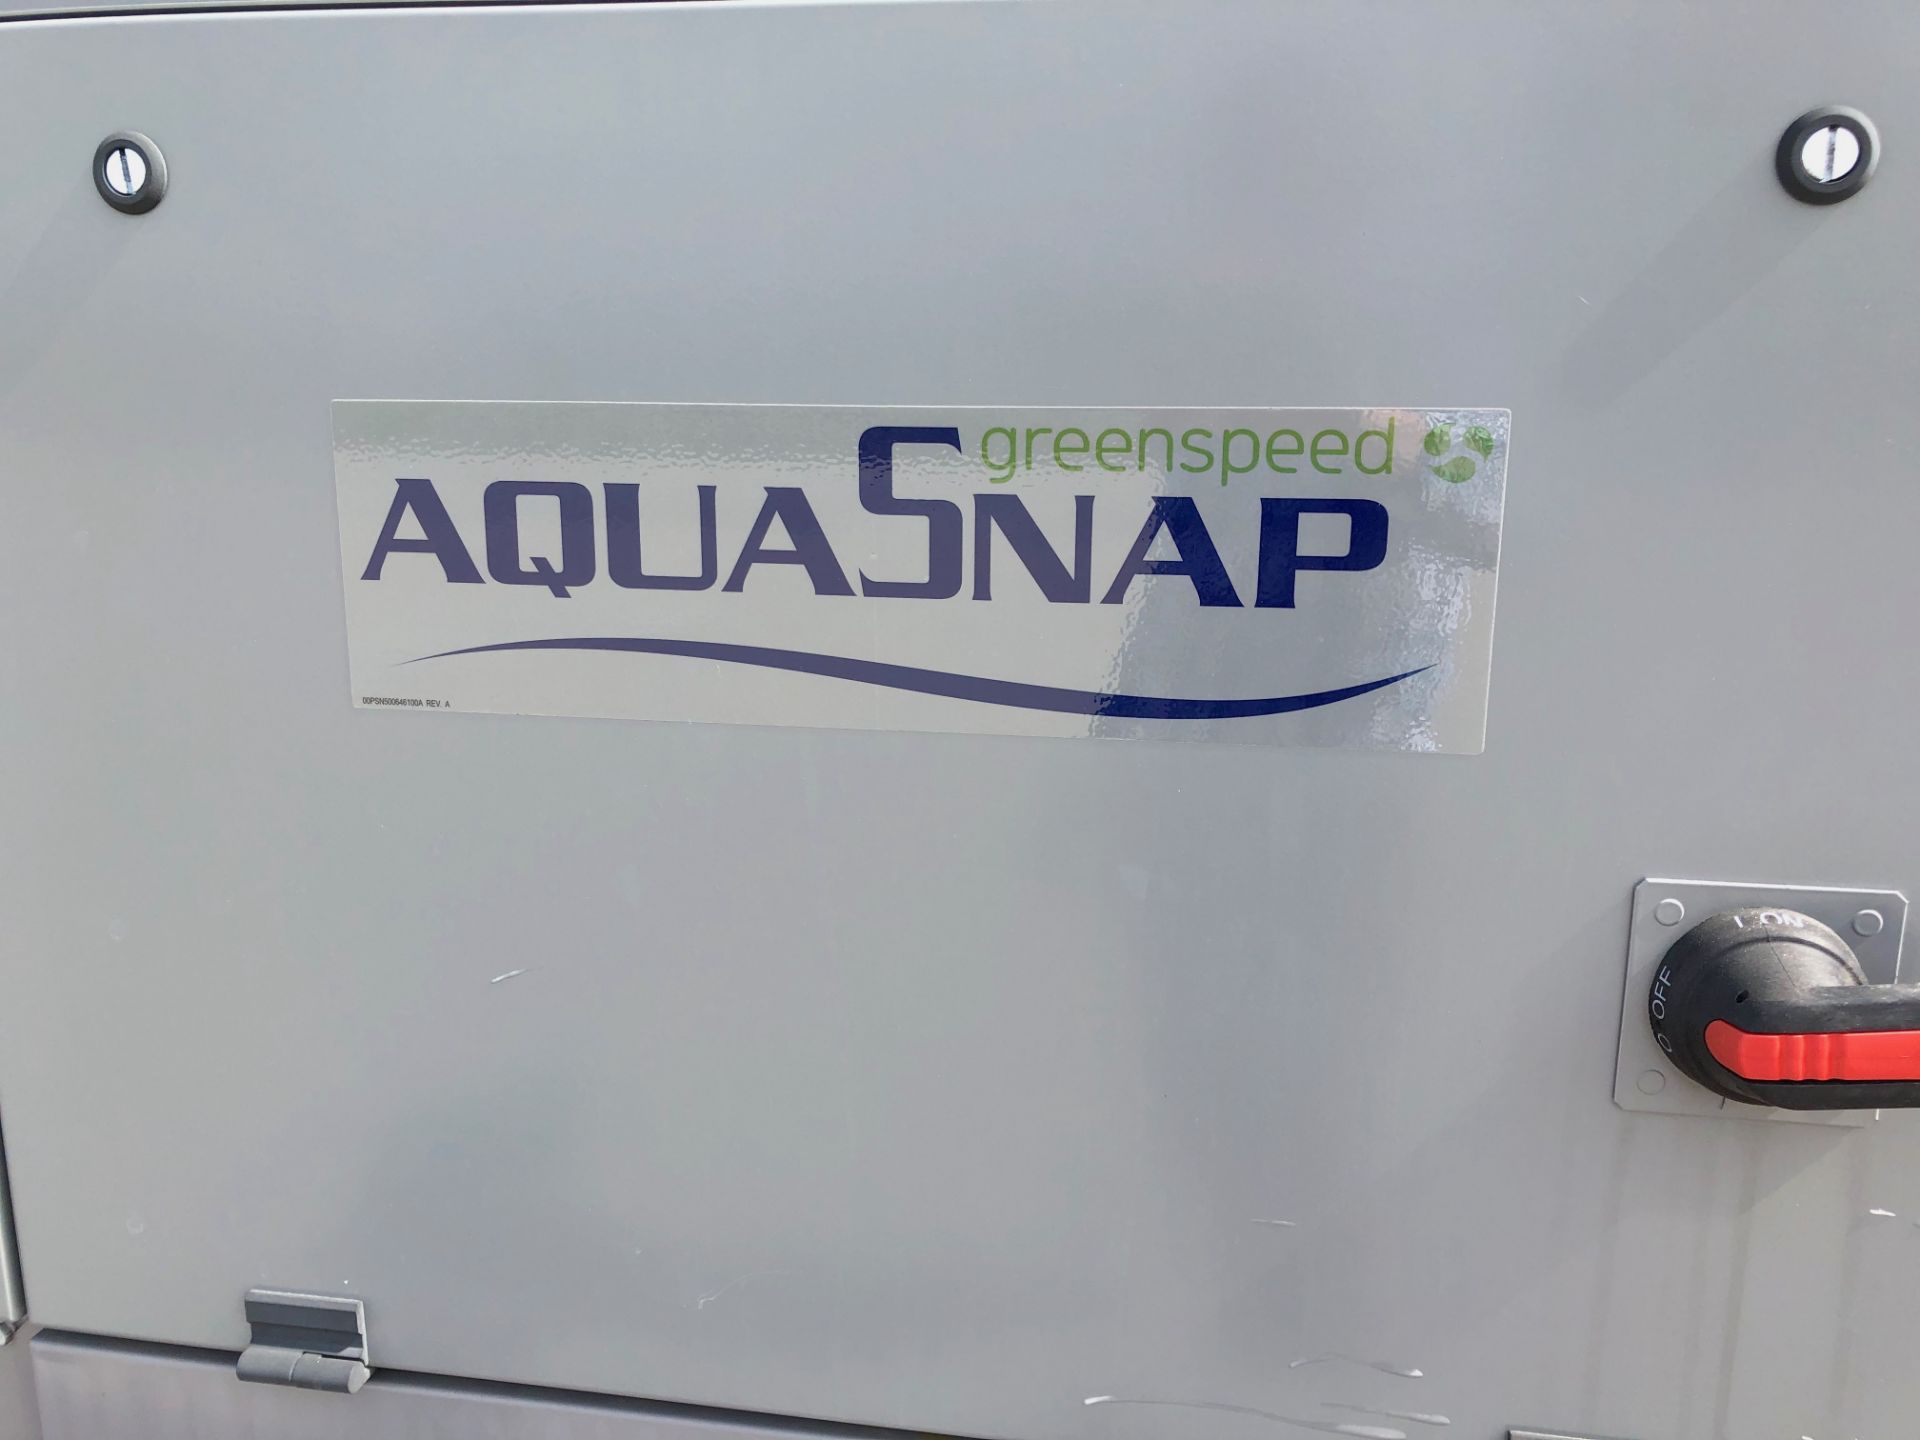 Carrier AquaSnap Air Cooled Liquid Chiller with Puron Refrigerant - Image 4 of 6